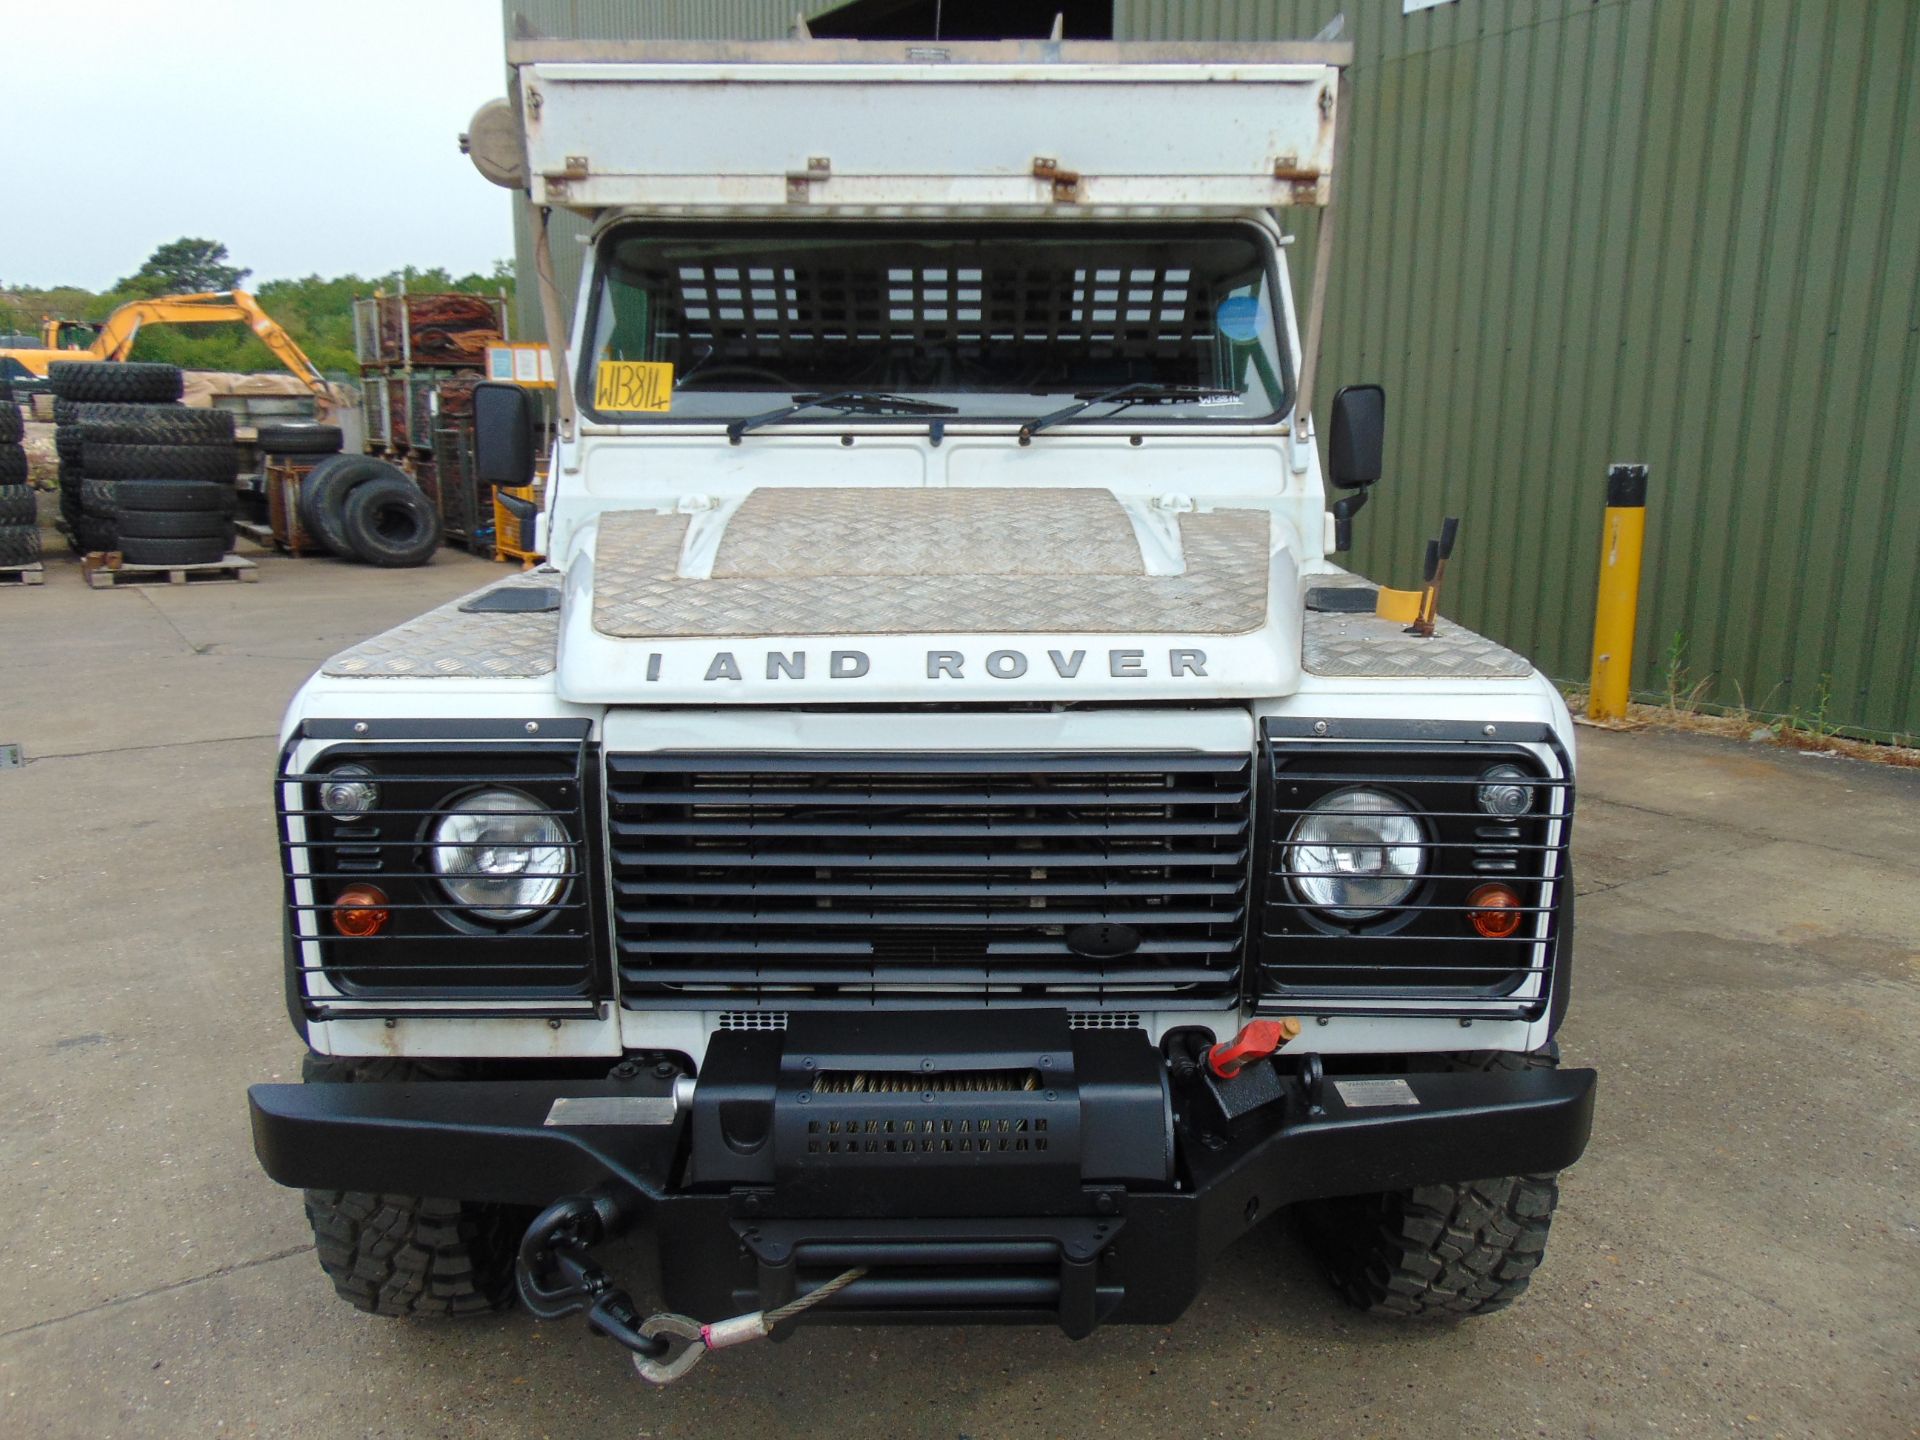 2013 Land Rover Defender 110 Puma hardtop 4x4 Utility vehicle (mobile workshop) with hydraulic winch - Image 3 of 44